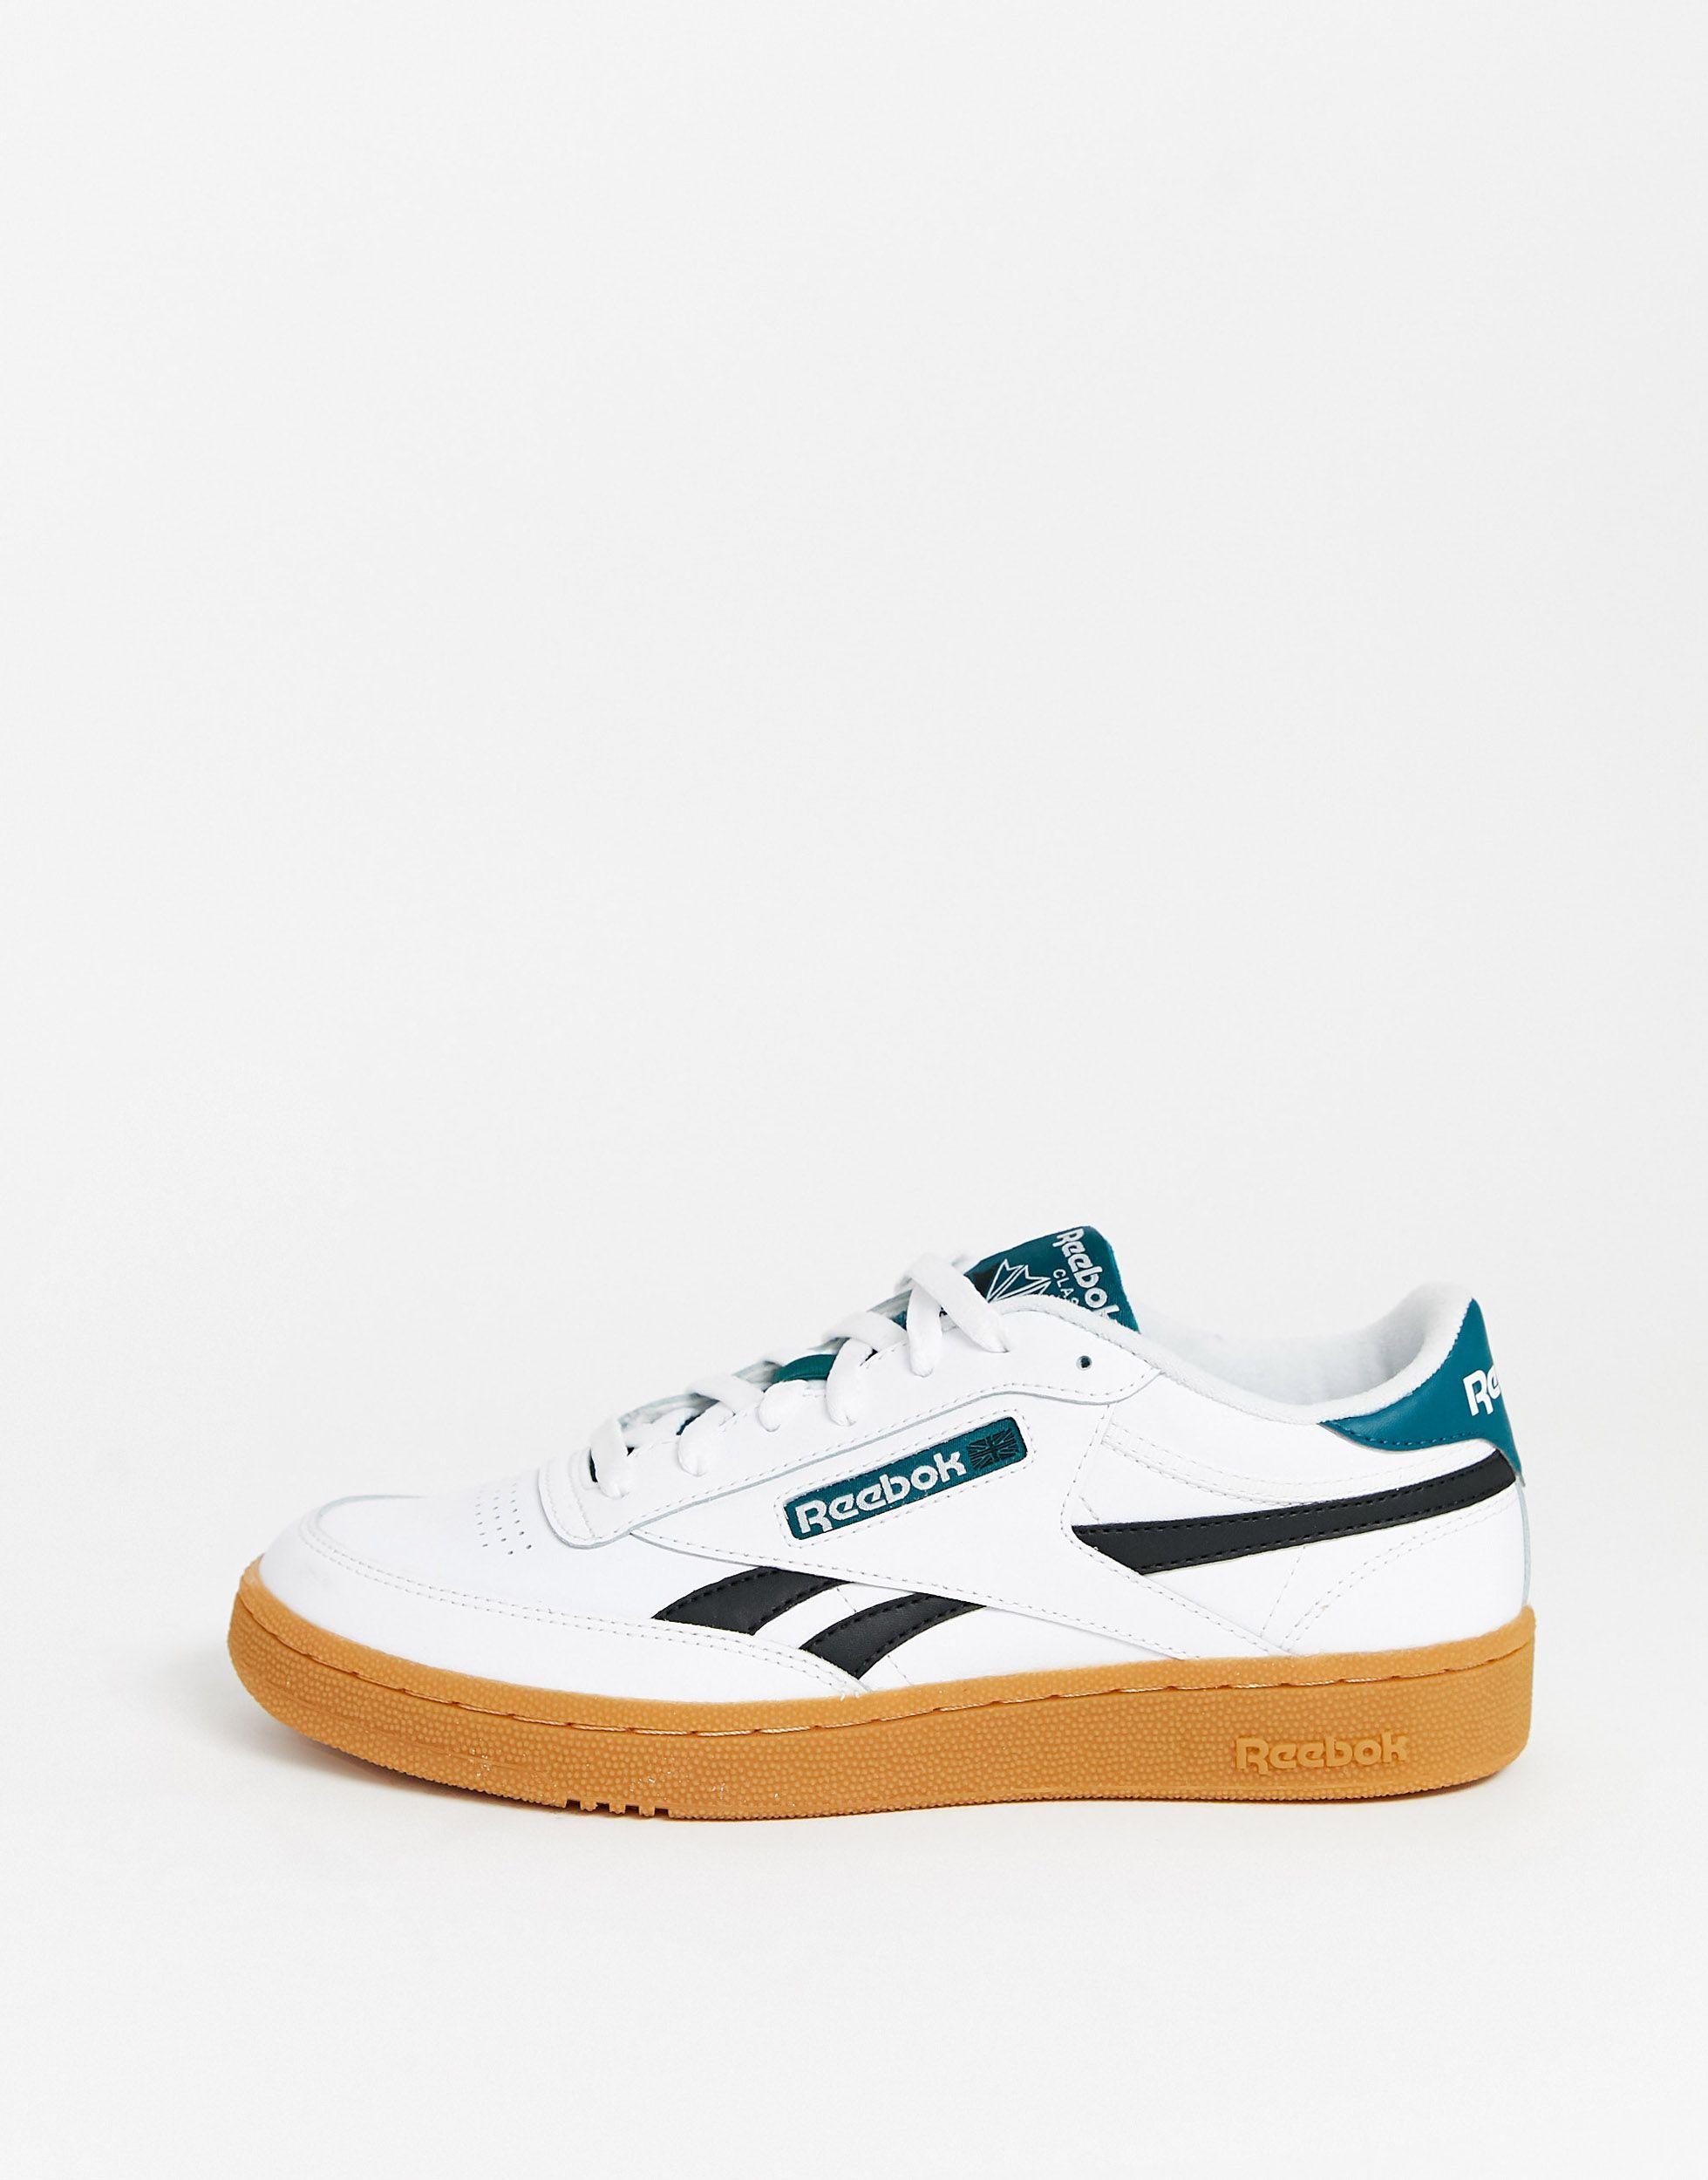 Reebok Leather Club C Revenge Sneaker With Gum Sole-white for Men - Lyst